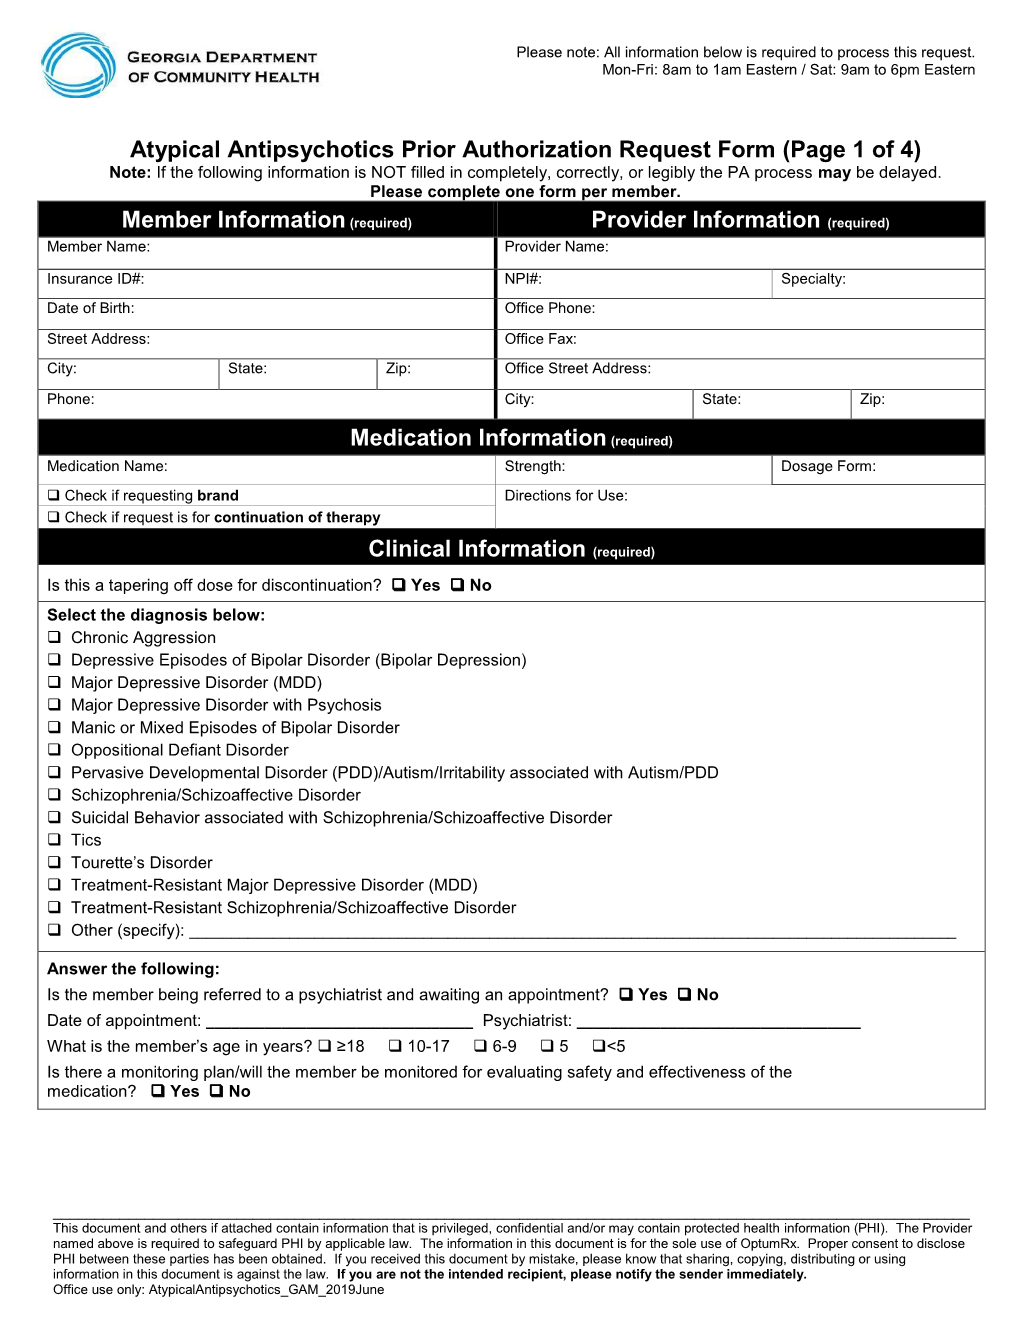 Atypical Antipsychotics Pa Request Form